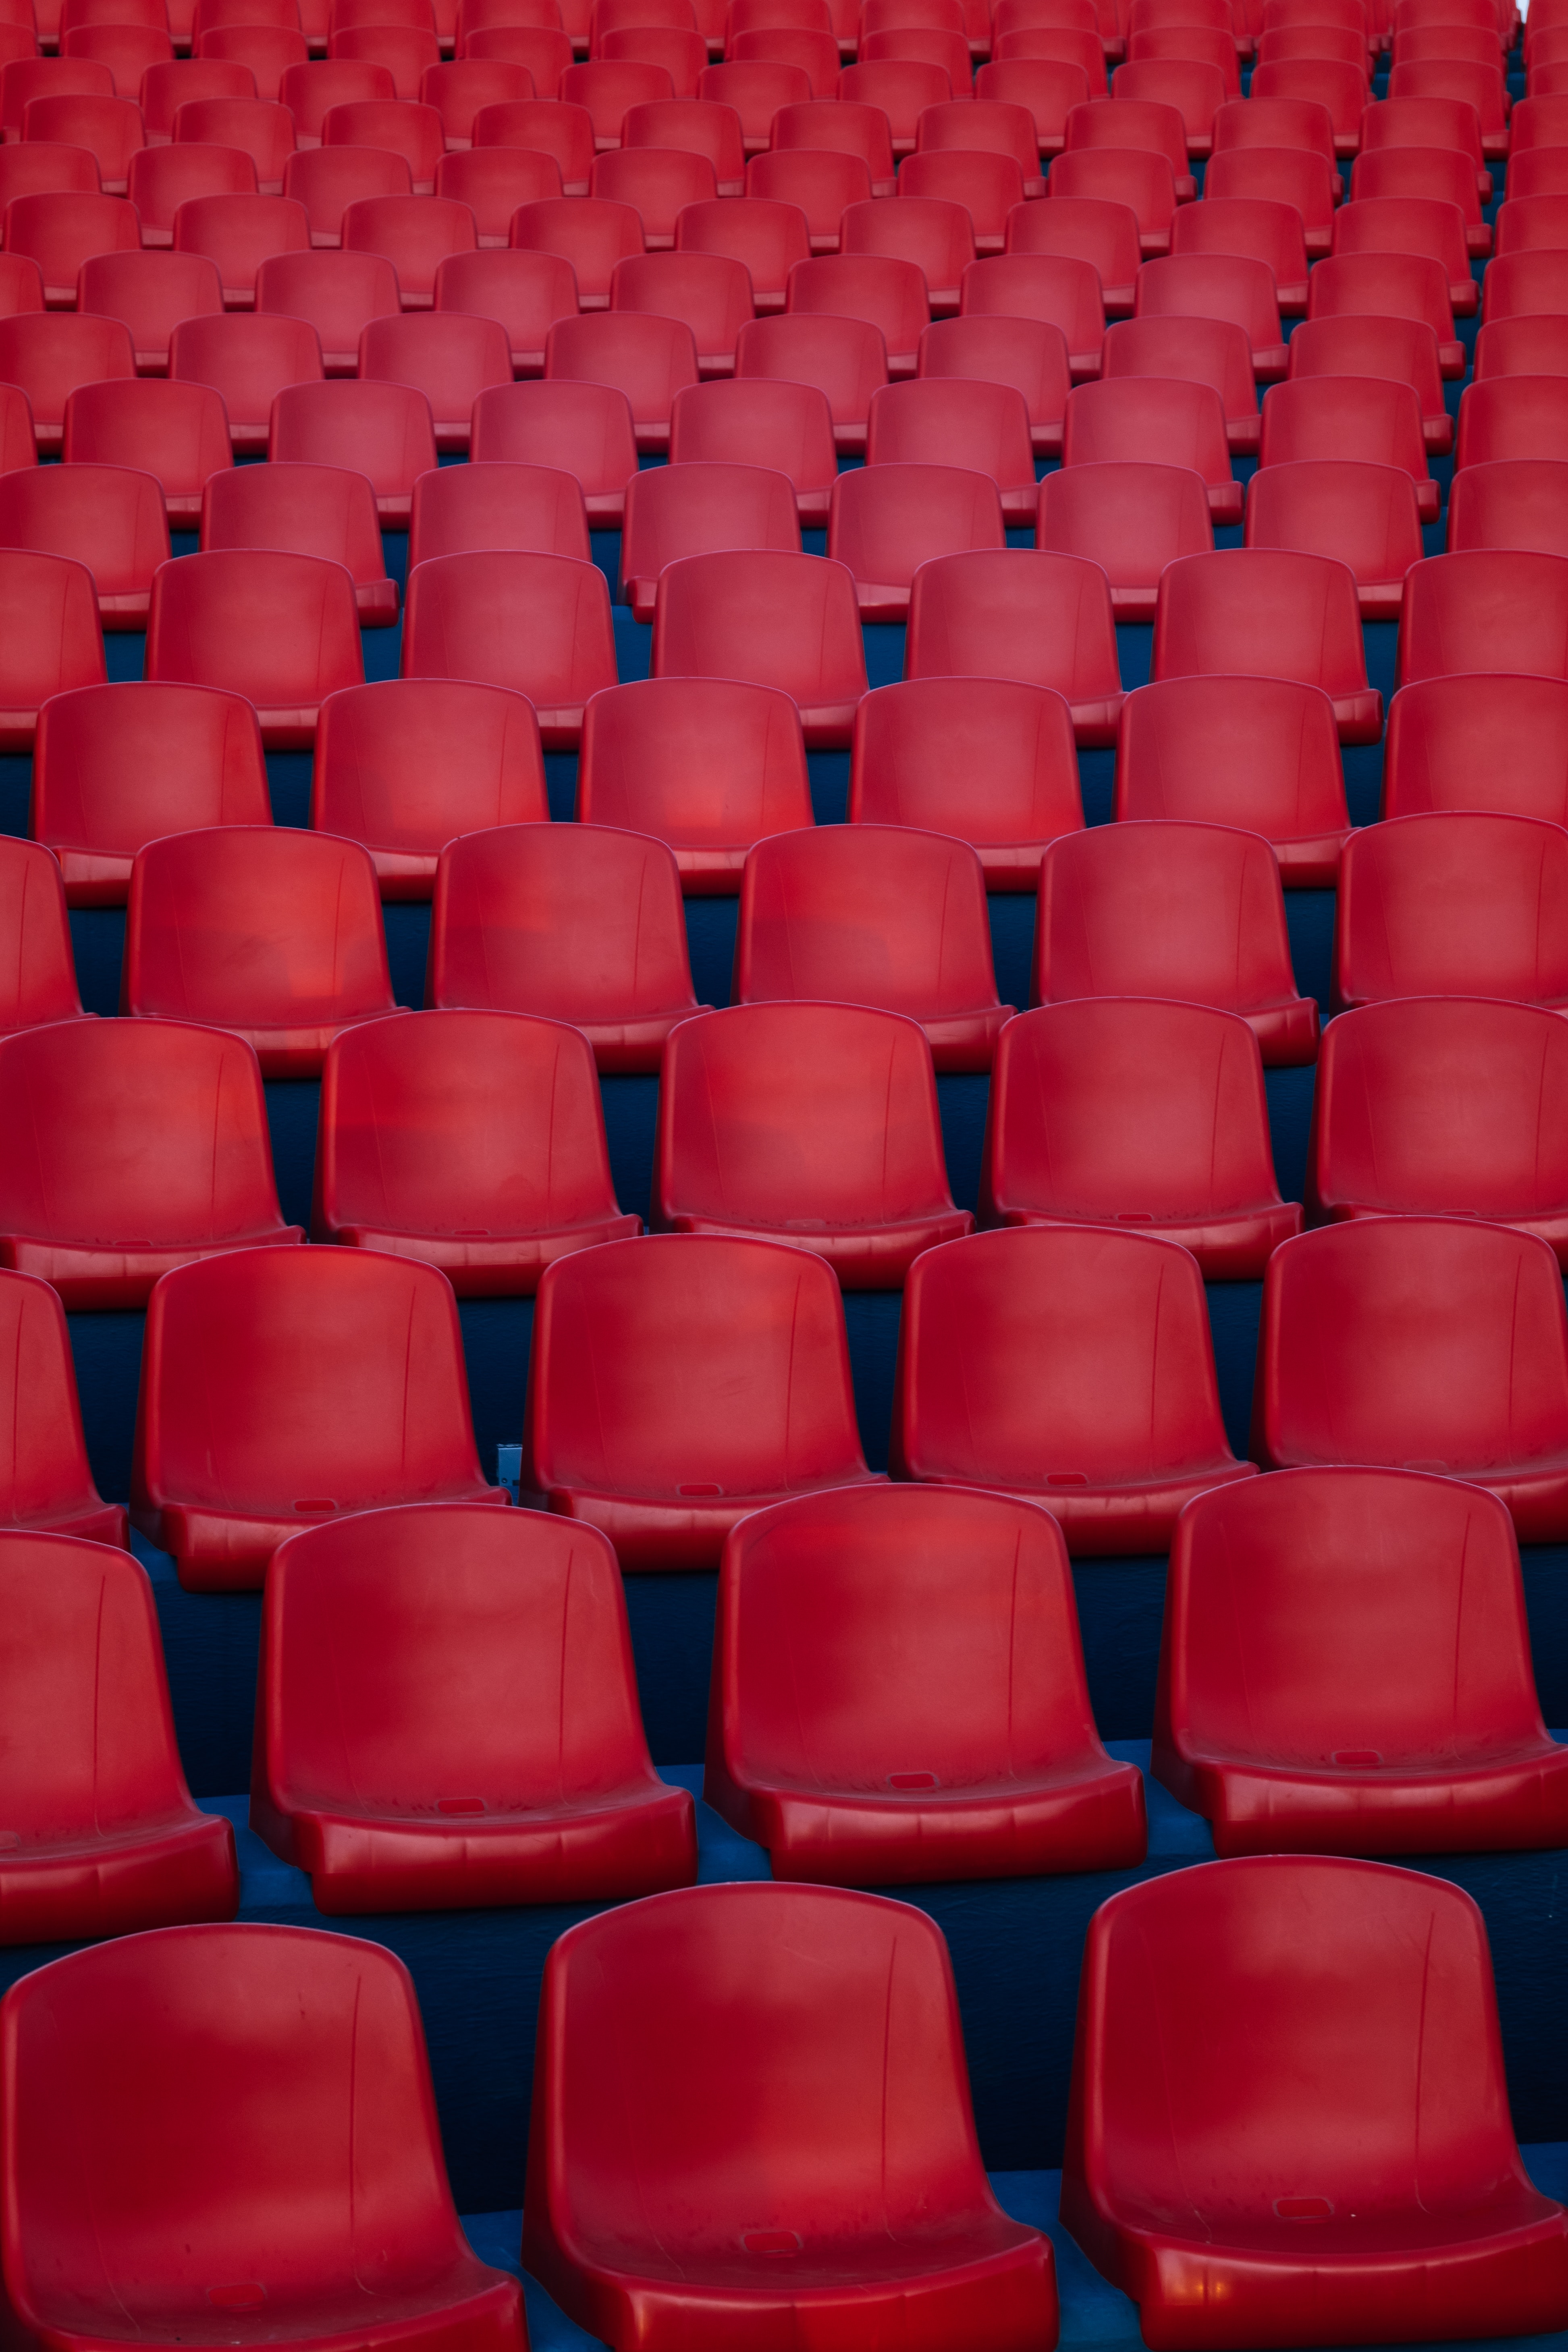 cinema, red, miscellanea, miscellaneous, rows, ranks, chairs, armchairs